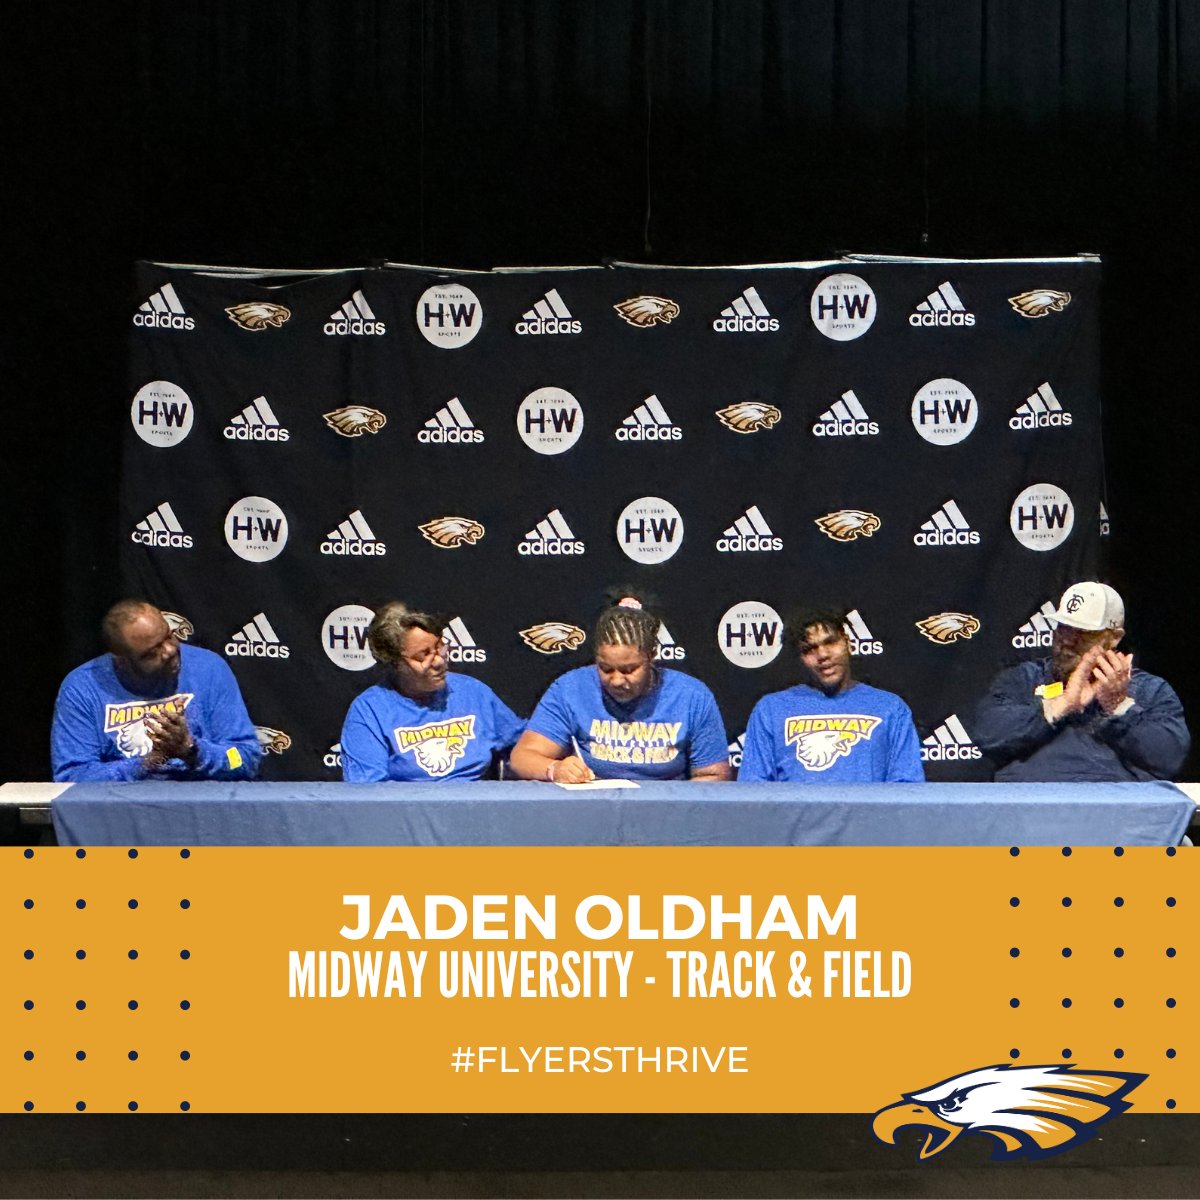 Congratulations to Jaden Oldham on committing to Midway University as part of the Track & Field team! #FlyersThrive #FlyerPride #WeAllThrive @OneTeamFCS